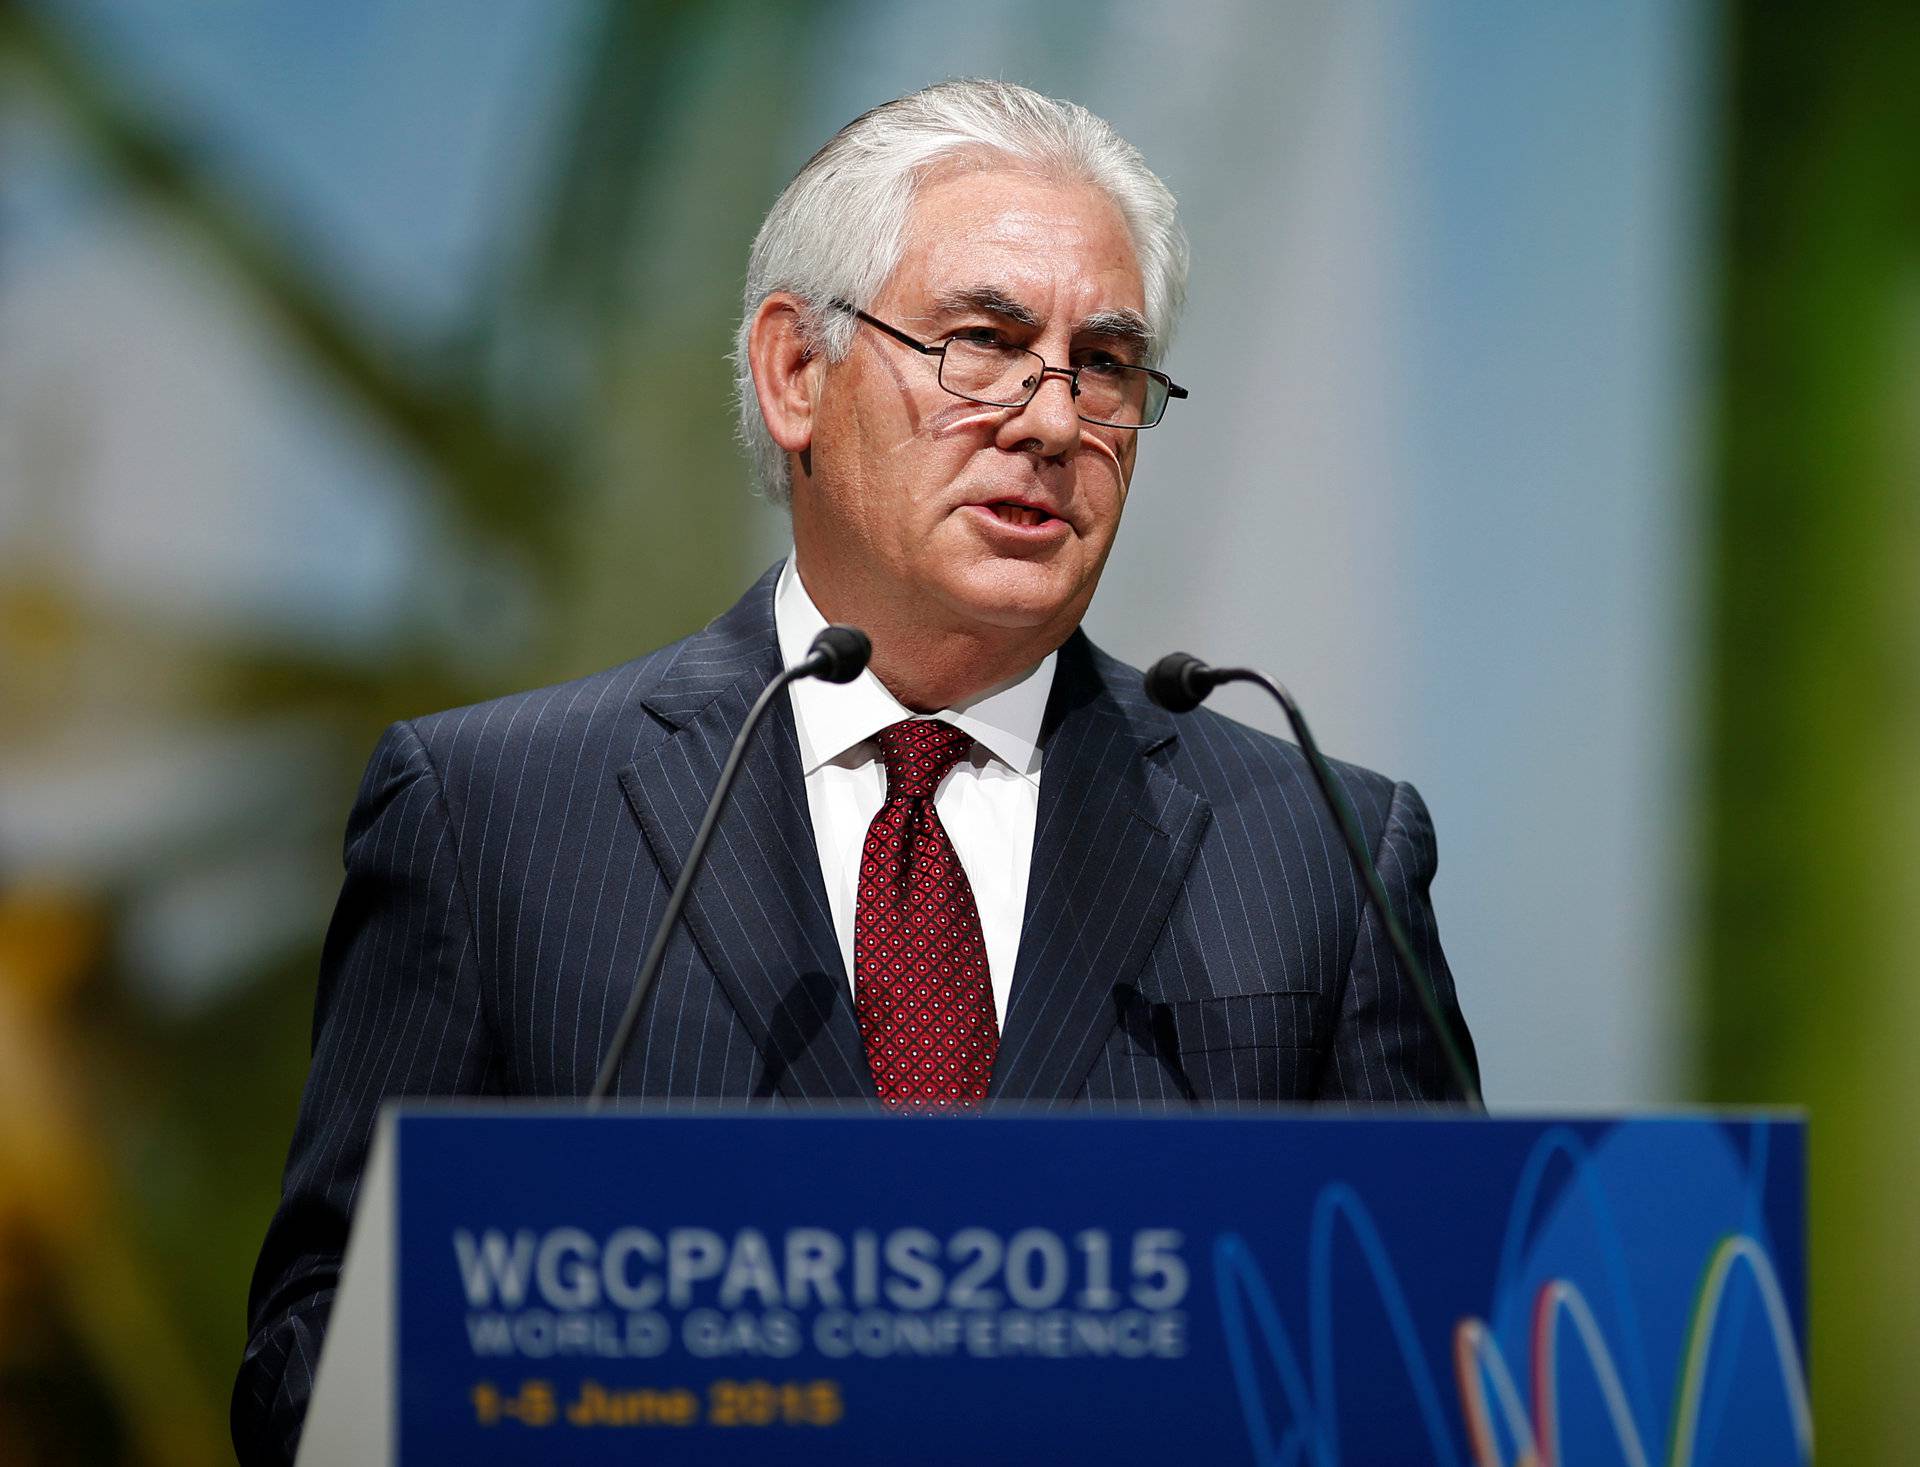 ExxonMobil Chairman and CEO Rex Tillerson speaks during the 26th World Gas Conference in Paris